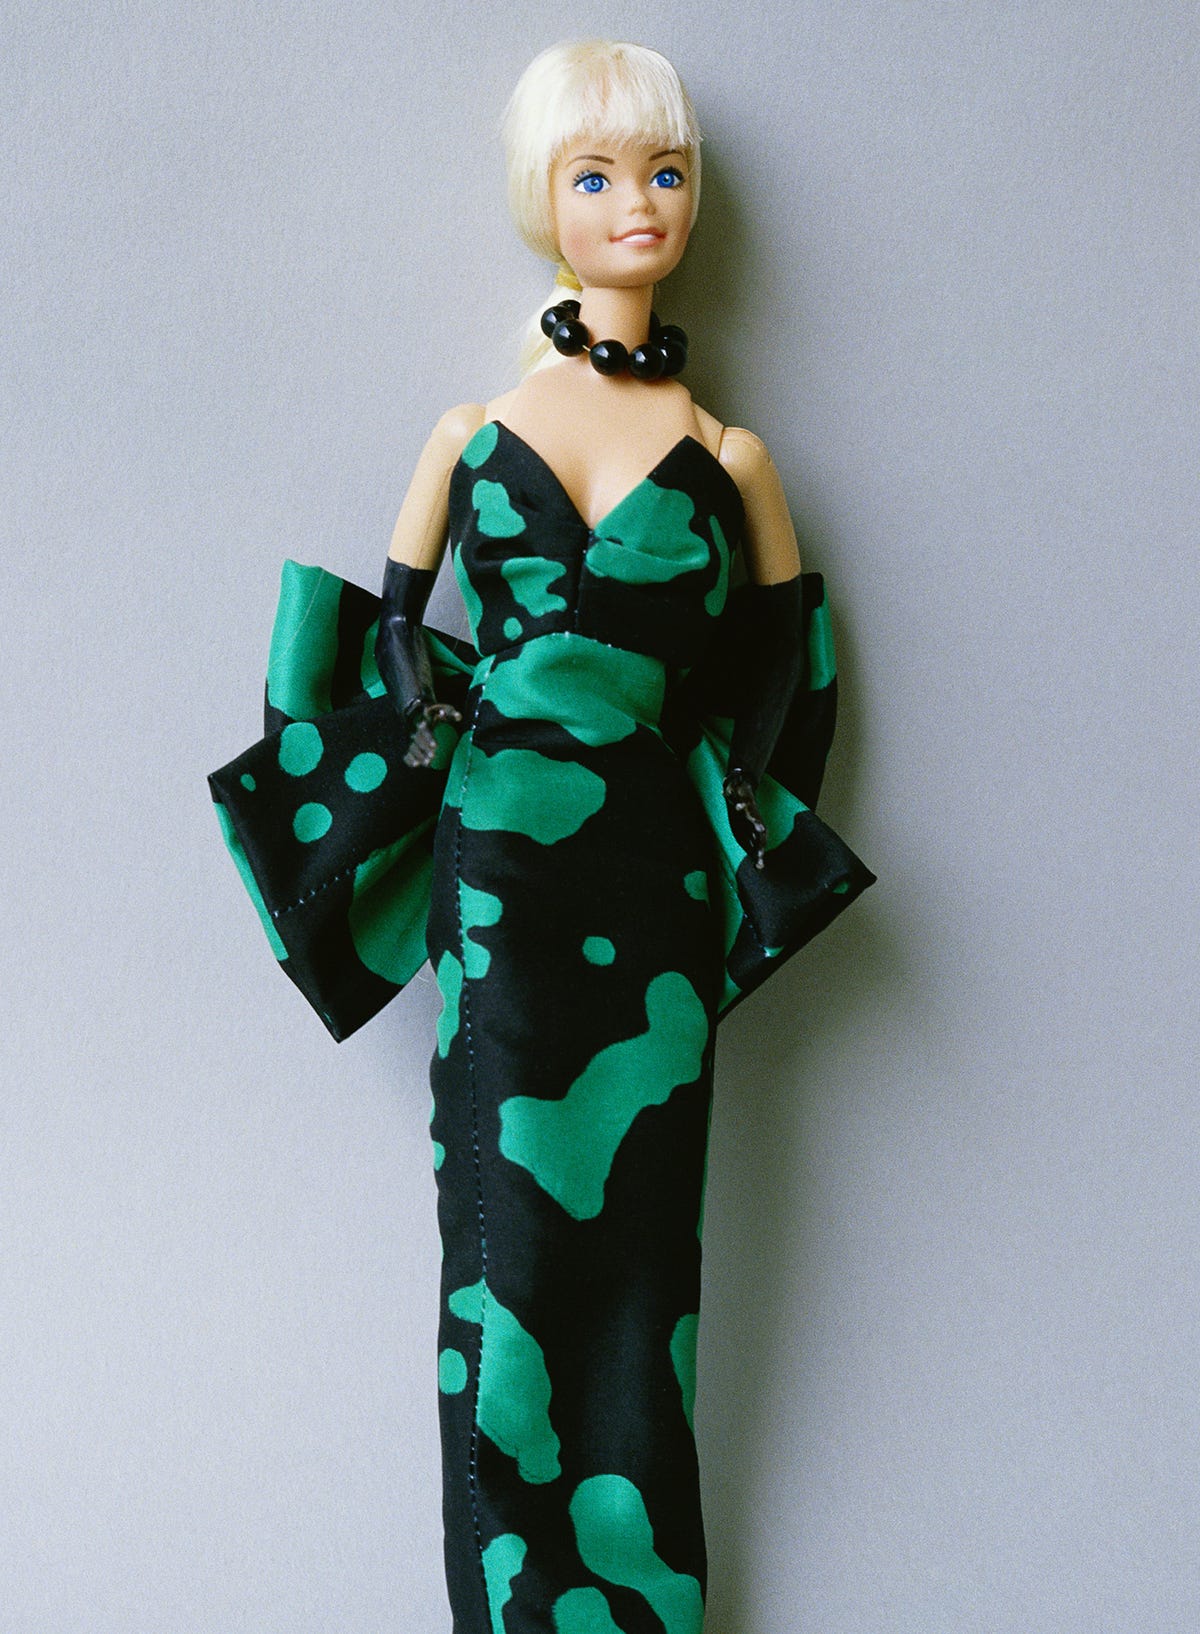 The whole history of Barbie in fashion